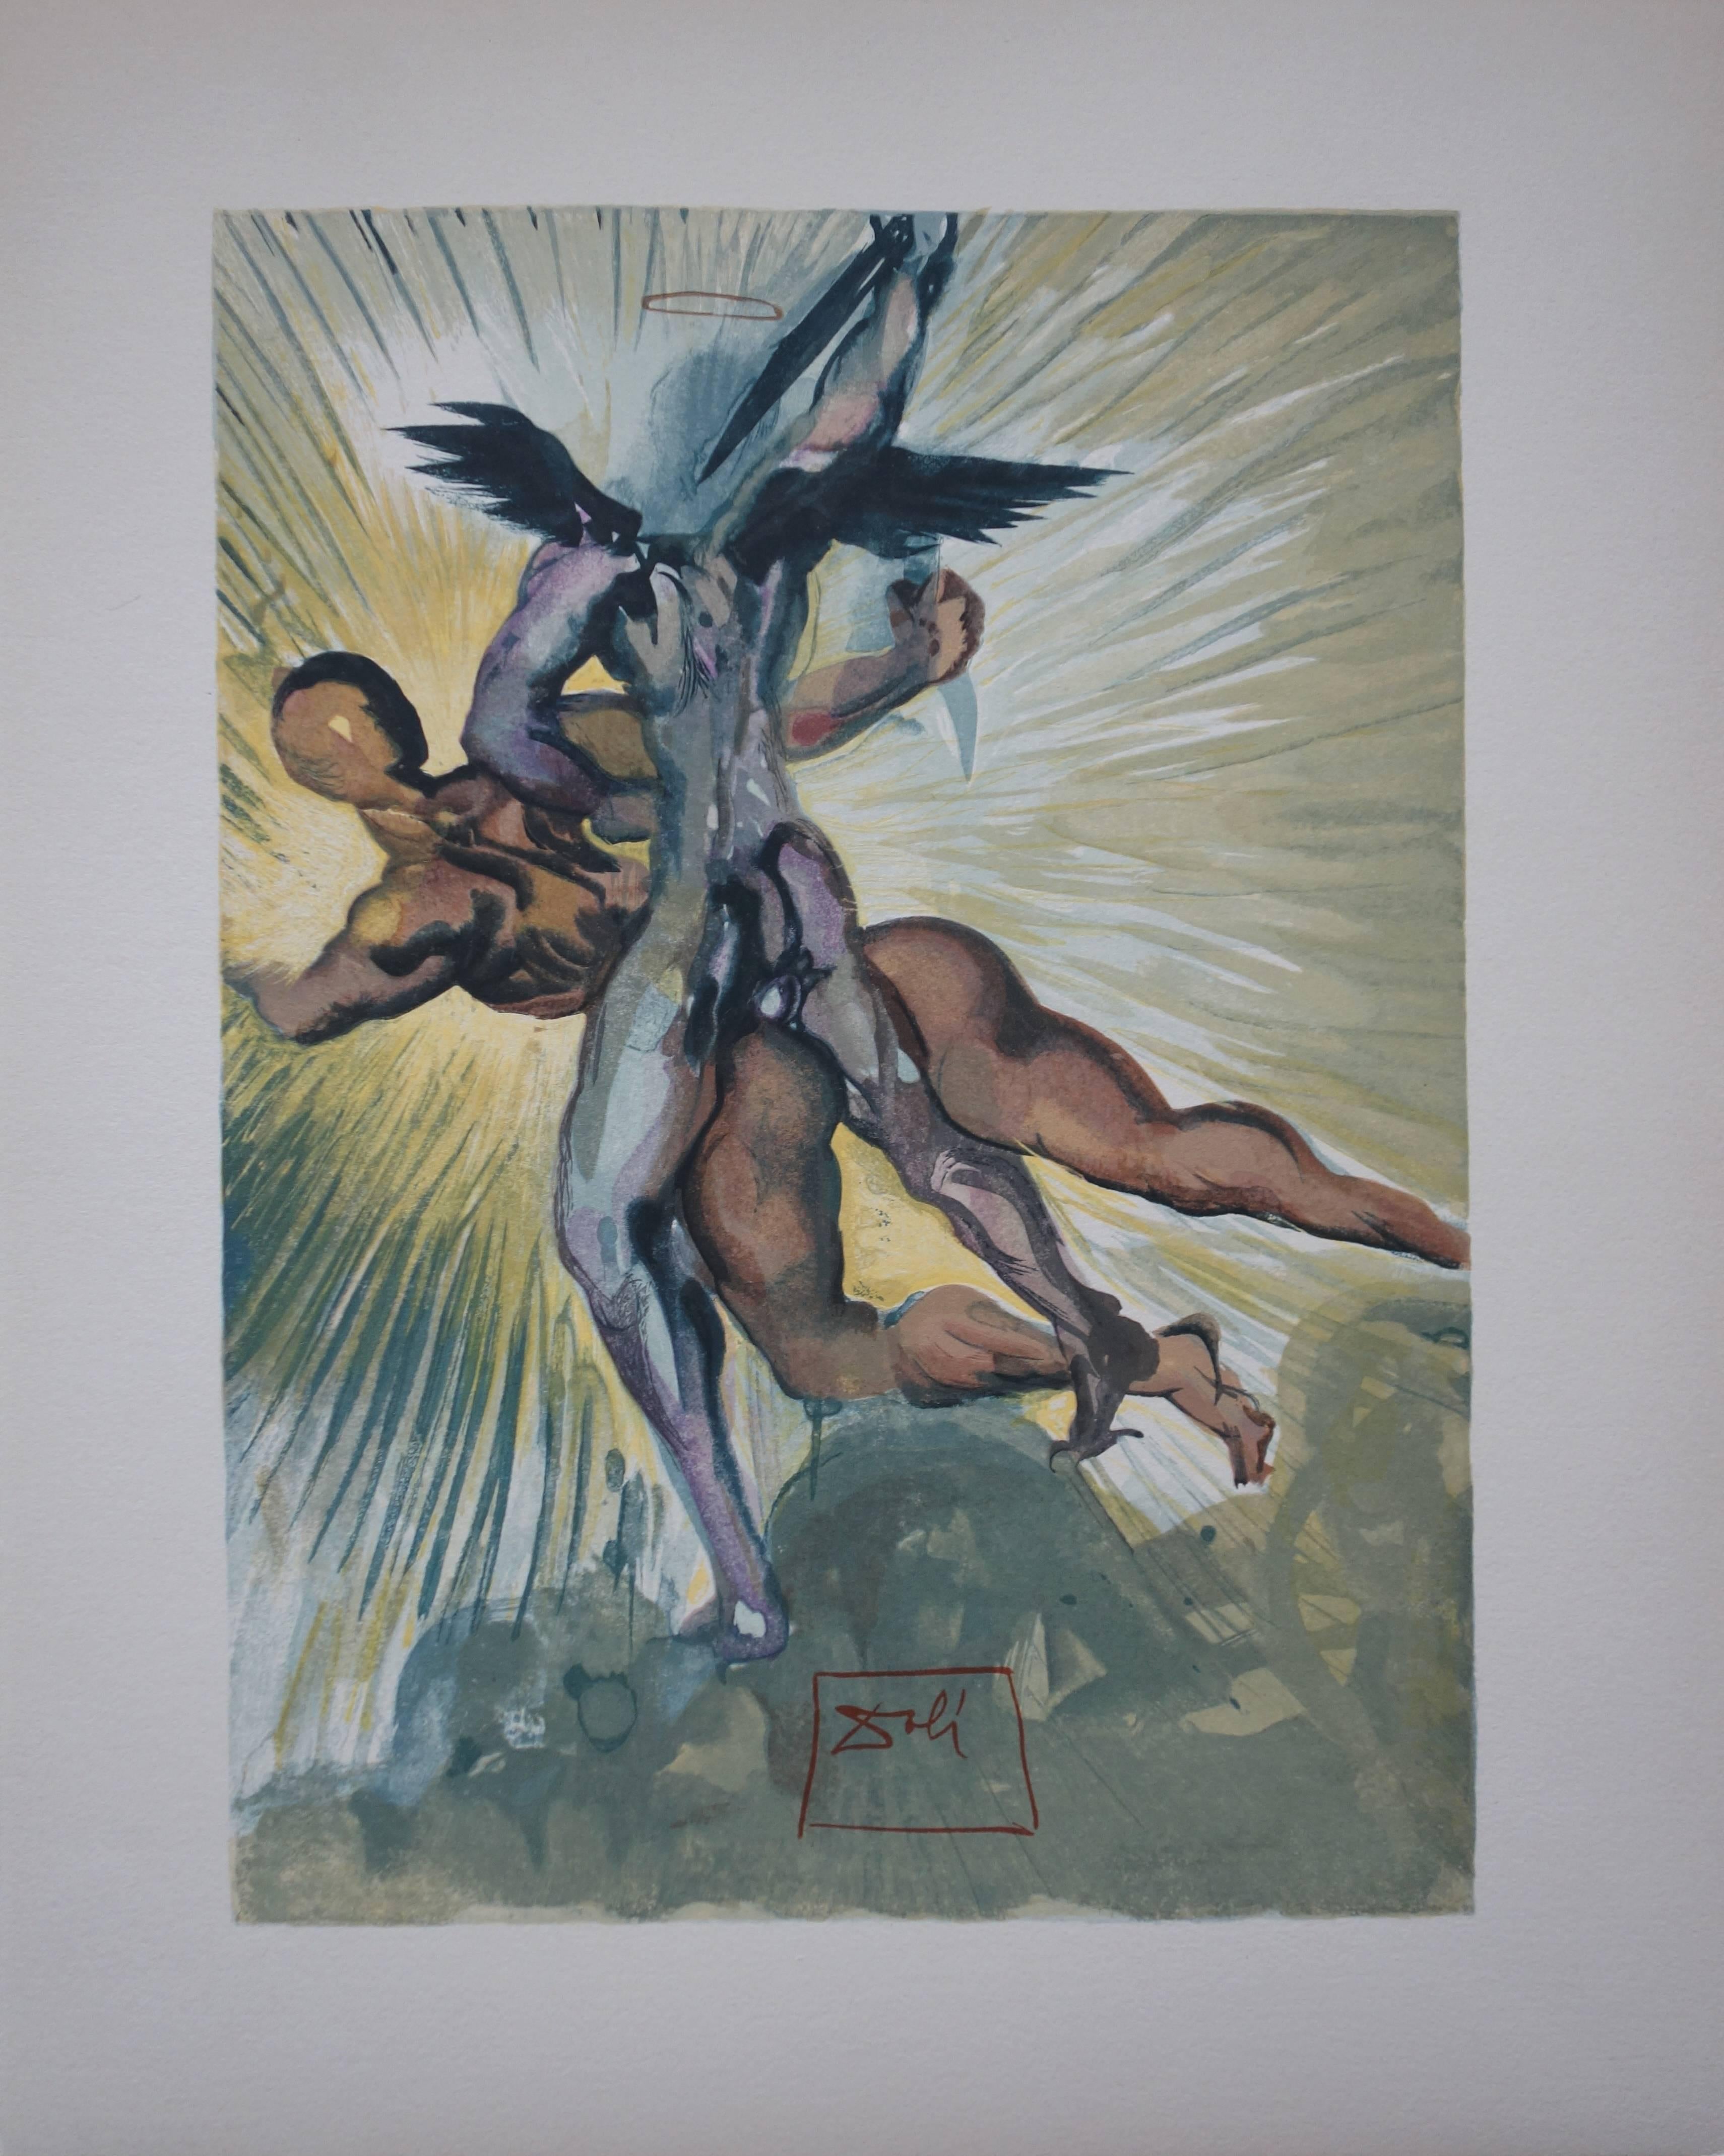 Salvador Dalí Figurative Print - Purgatory 8 - The Guardian Angels of the Valley - Original woodcut - 1963